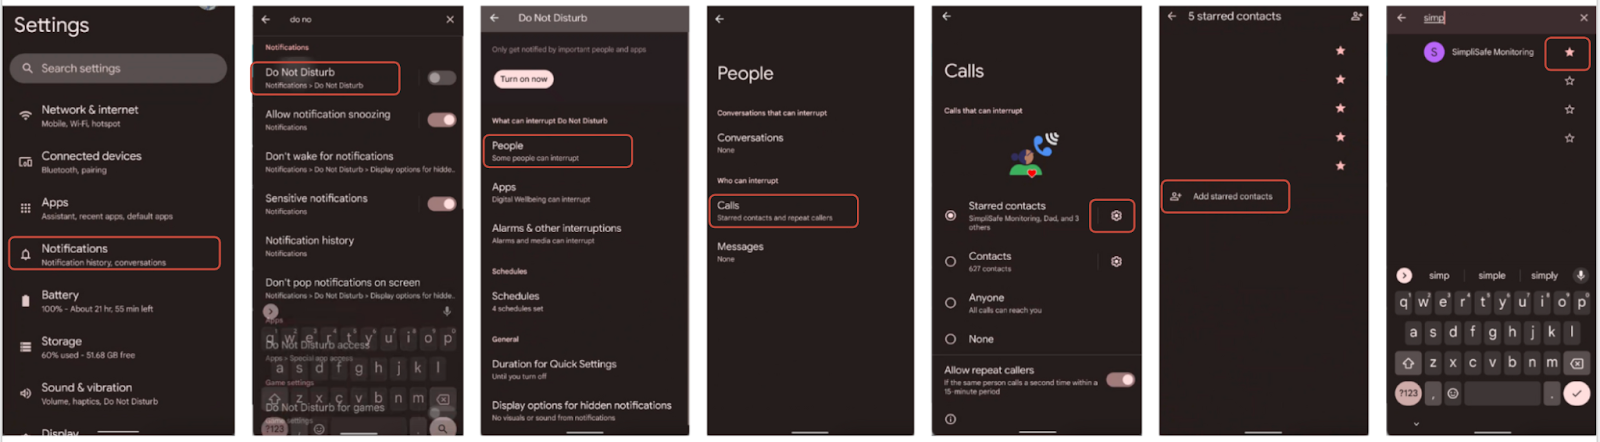 How to allow monitoring center's call through Do Not Disturb on Android, highlighting steps 2-7